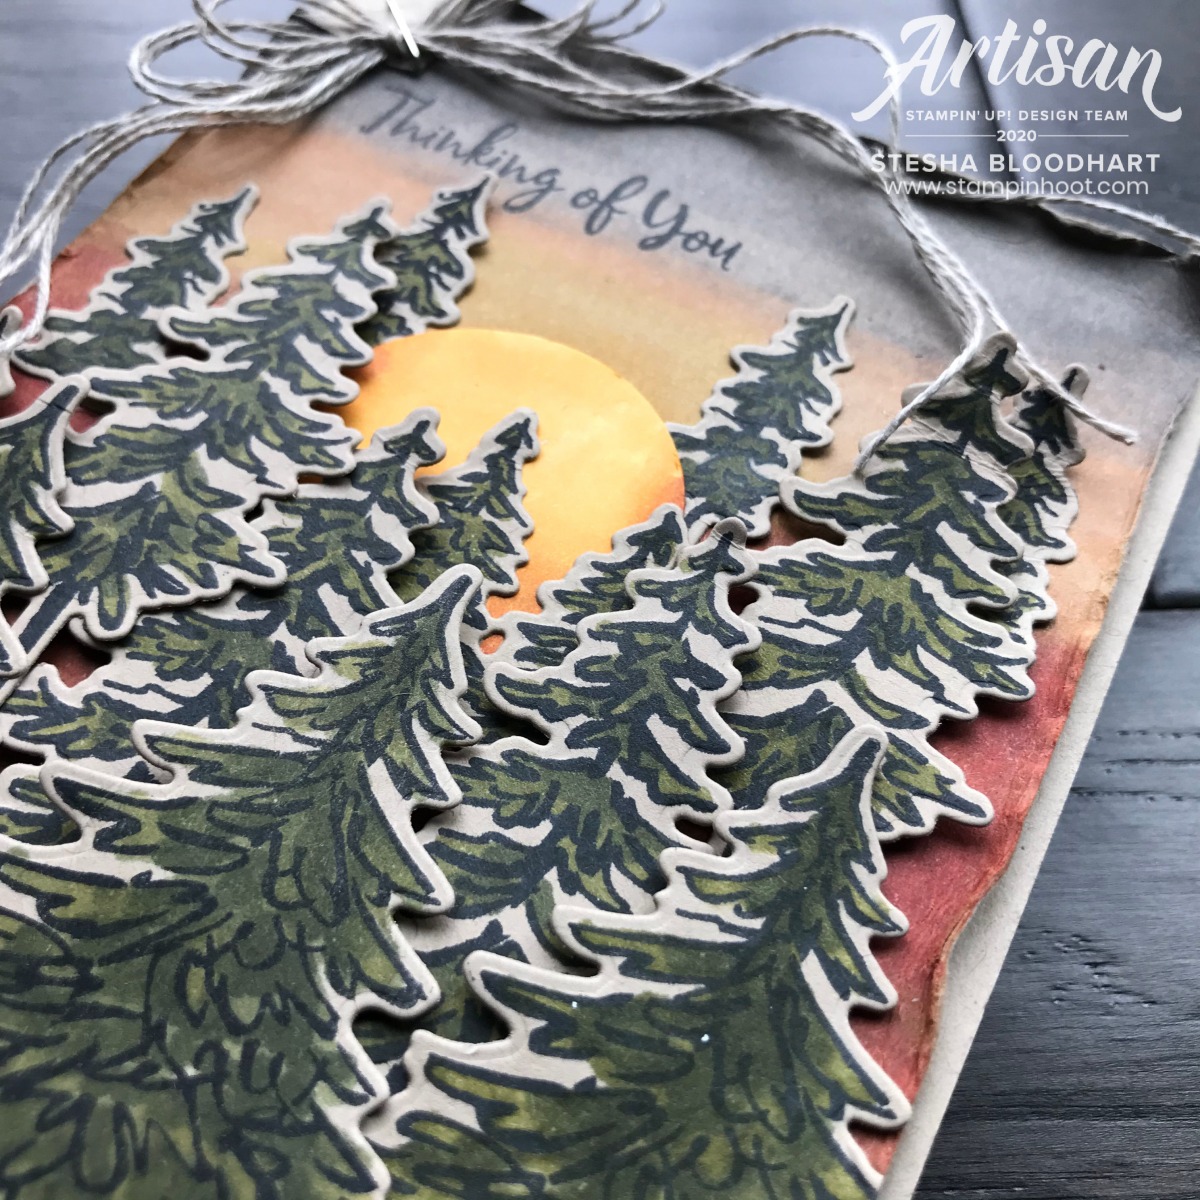 Create these cards using the In the Pines and Snow Wonder Bundles from Stampin' Up! 2020 Artisan Blog Hop, Stesha Bloodhart, Stampin' Hoot!